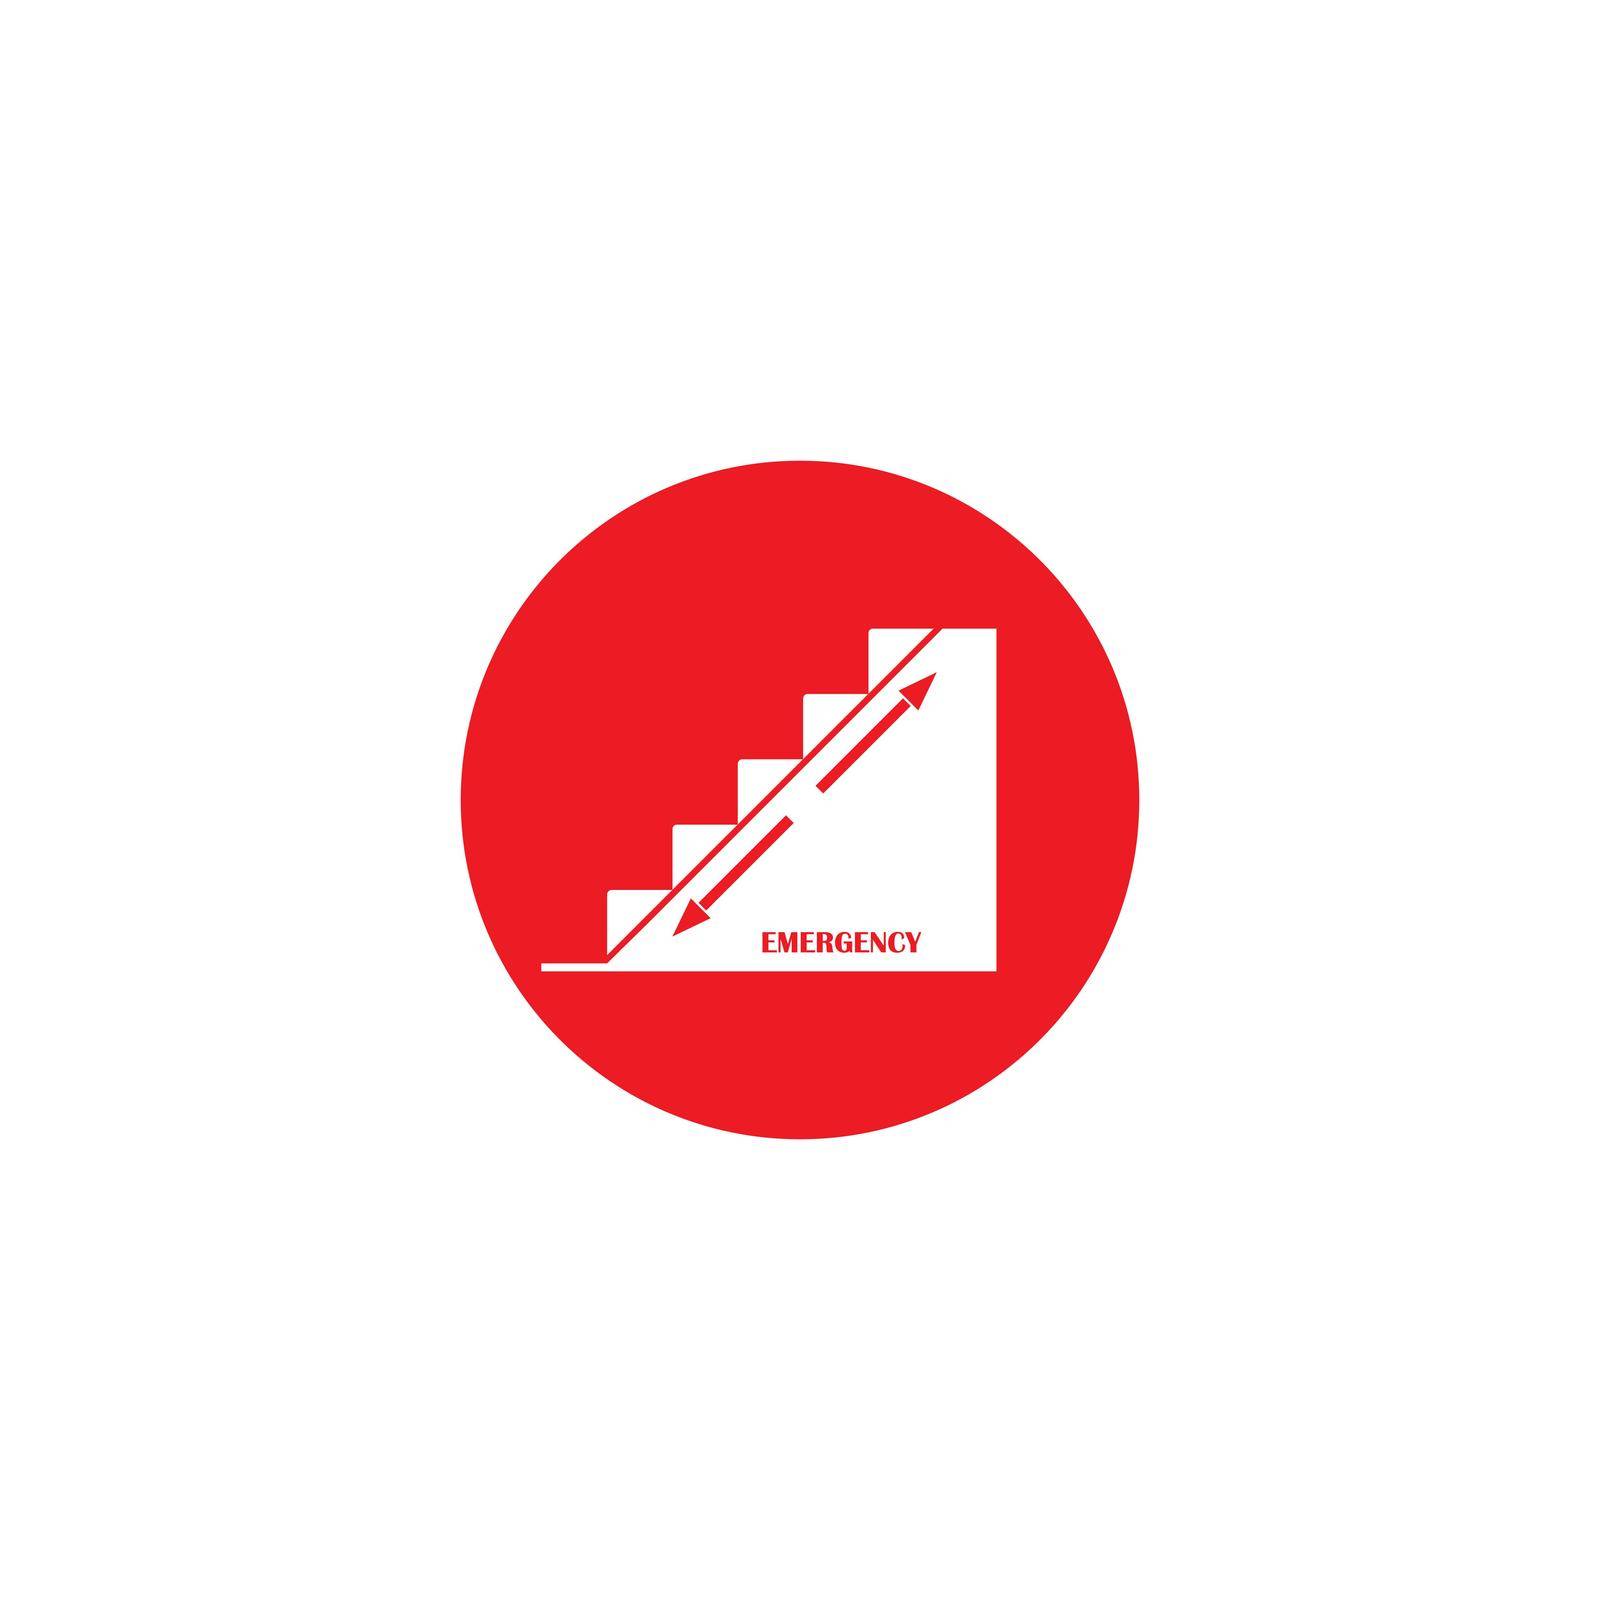 emergency stairs vector icon illustration logo design.